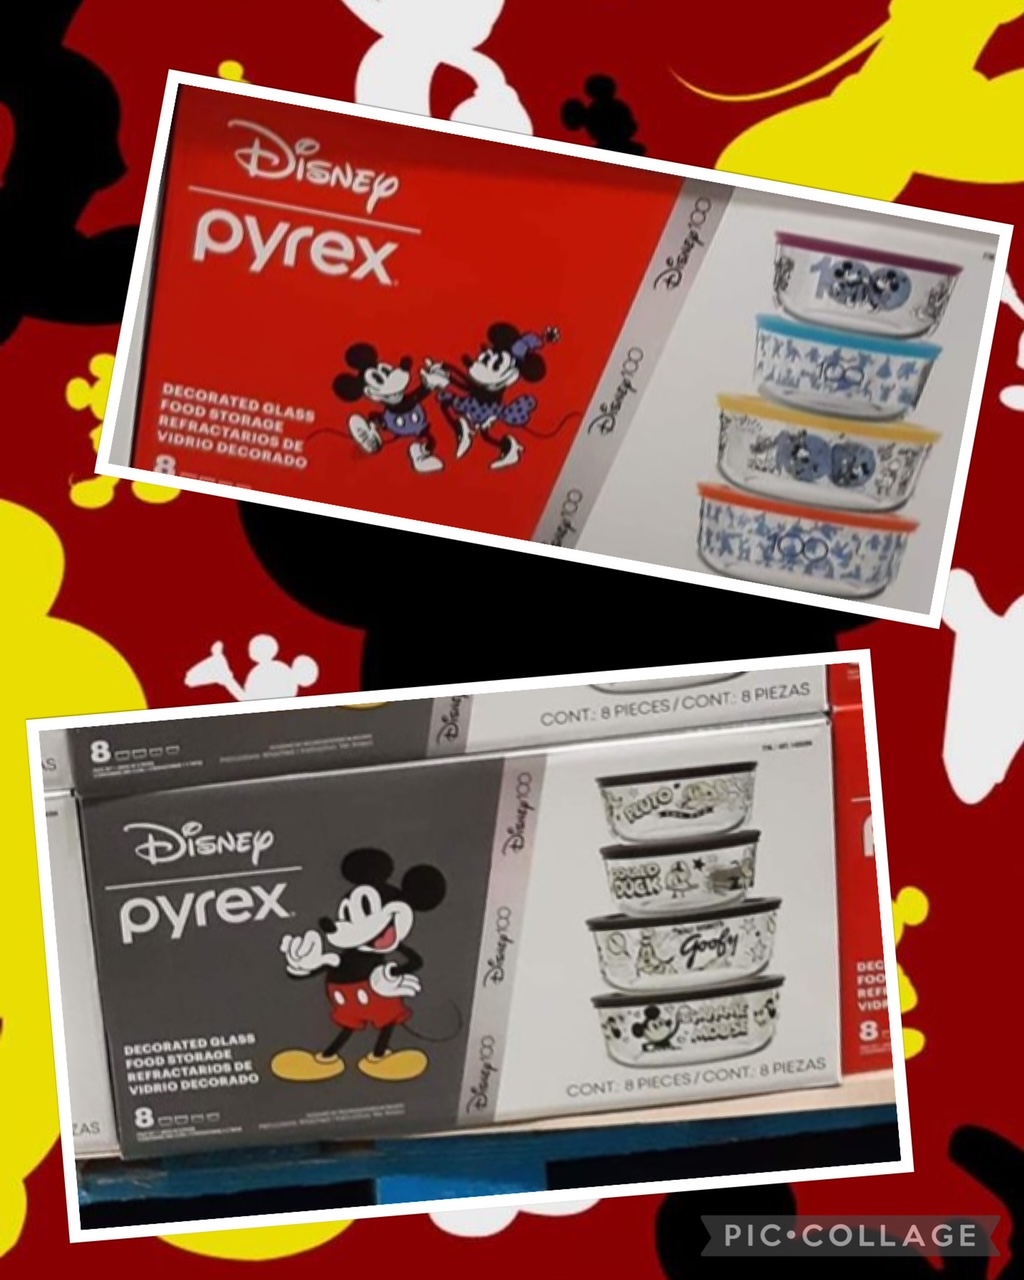 You Can Now Find Disney Pyrex at Costco